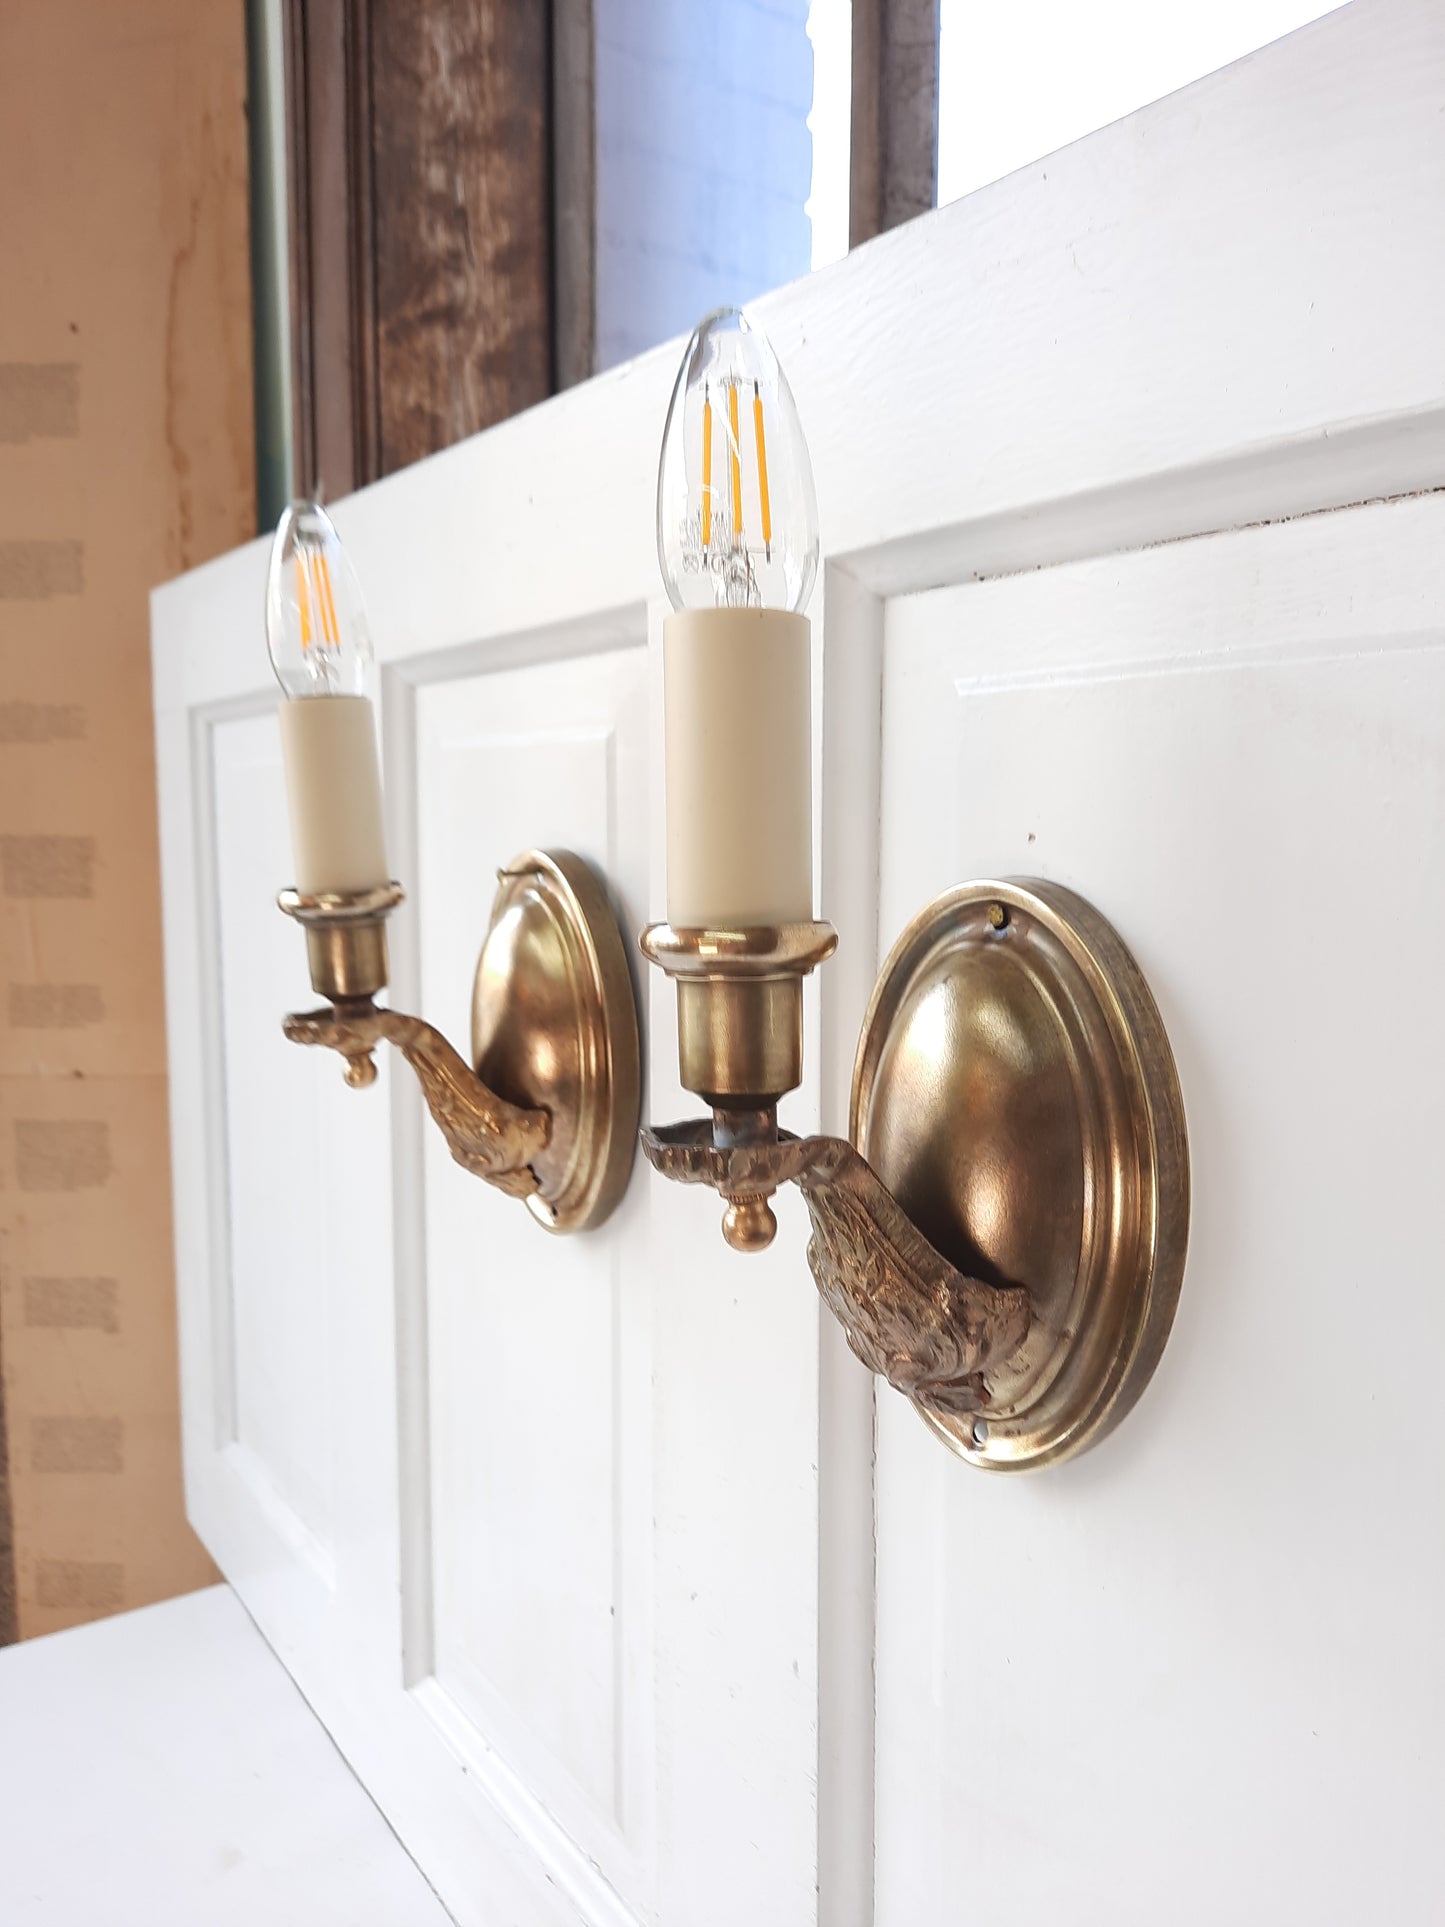 Pair of Vintage Brass Sconces, Two Antique Wall Sconce Lights with Candle Sockets 020806